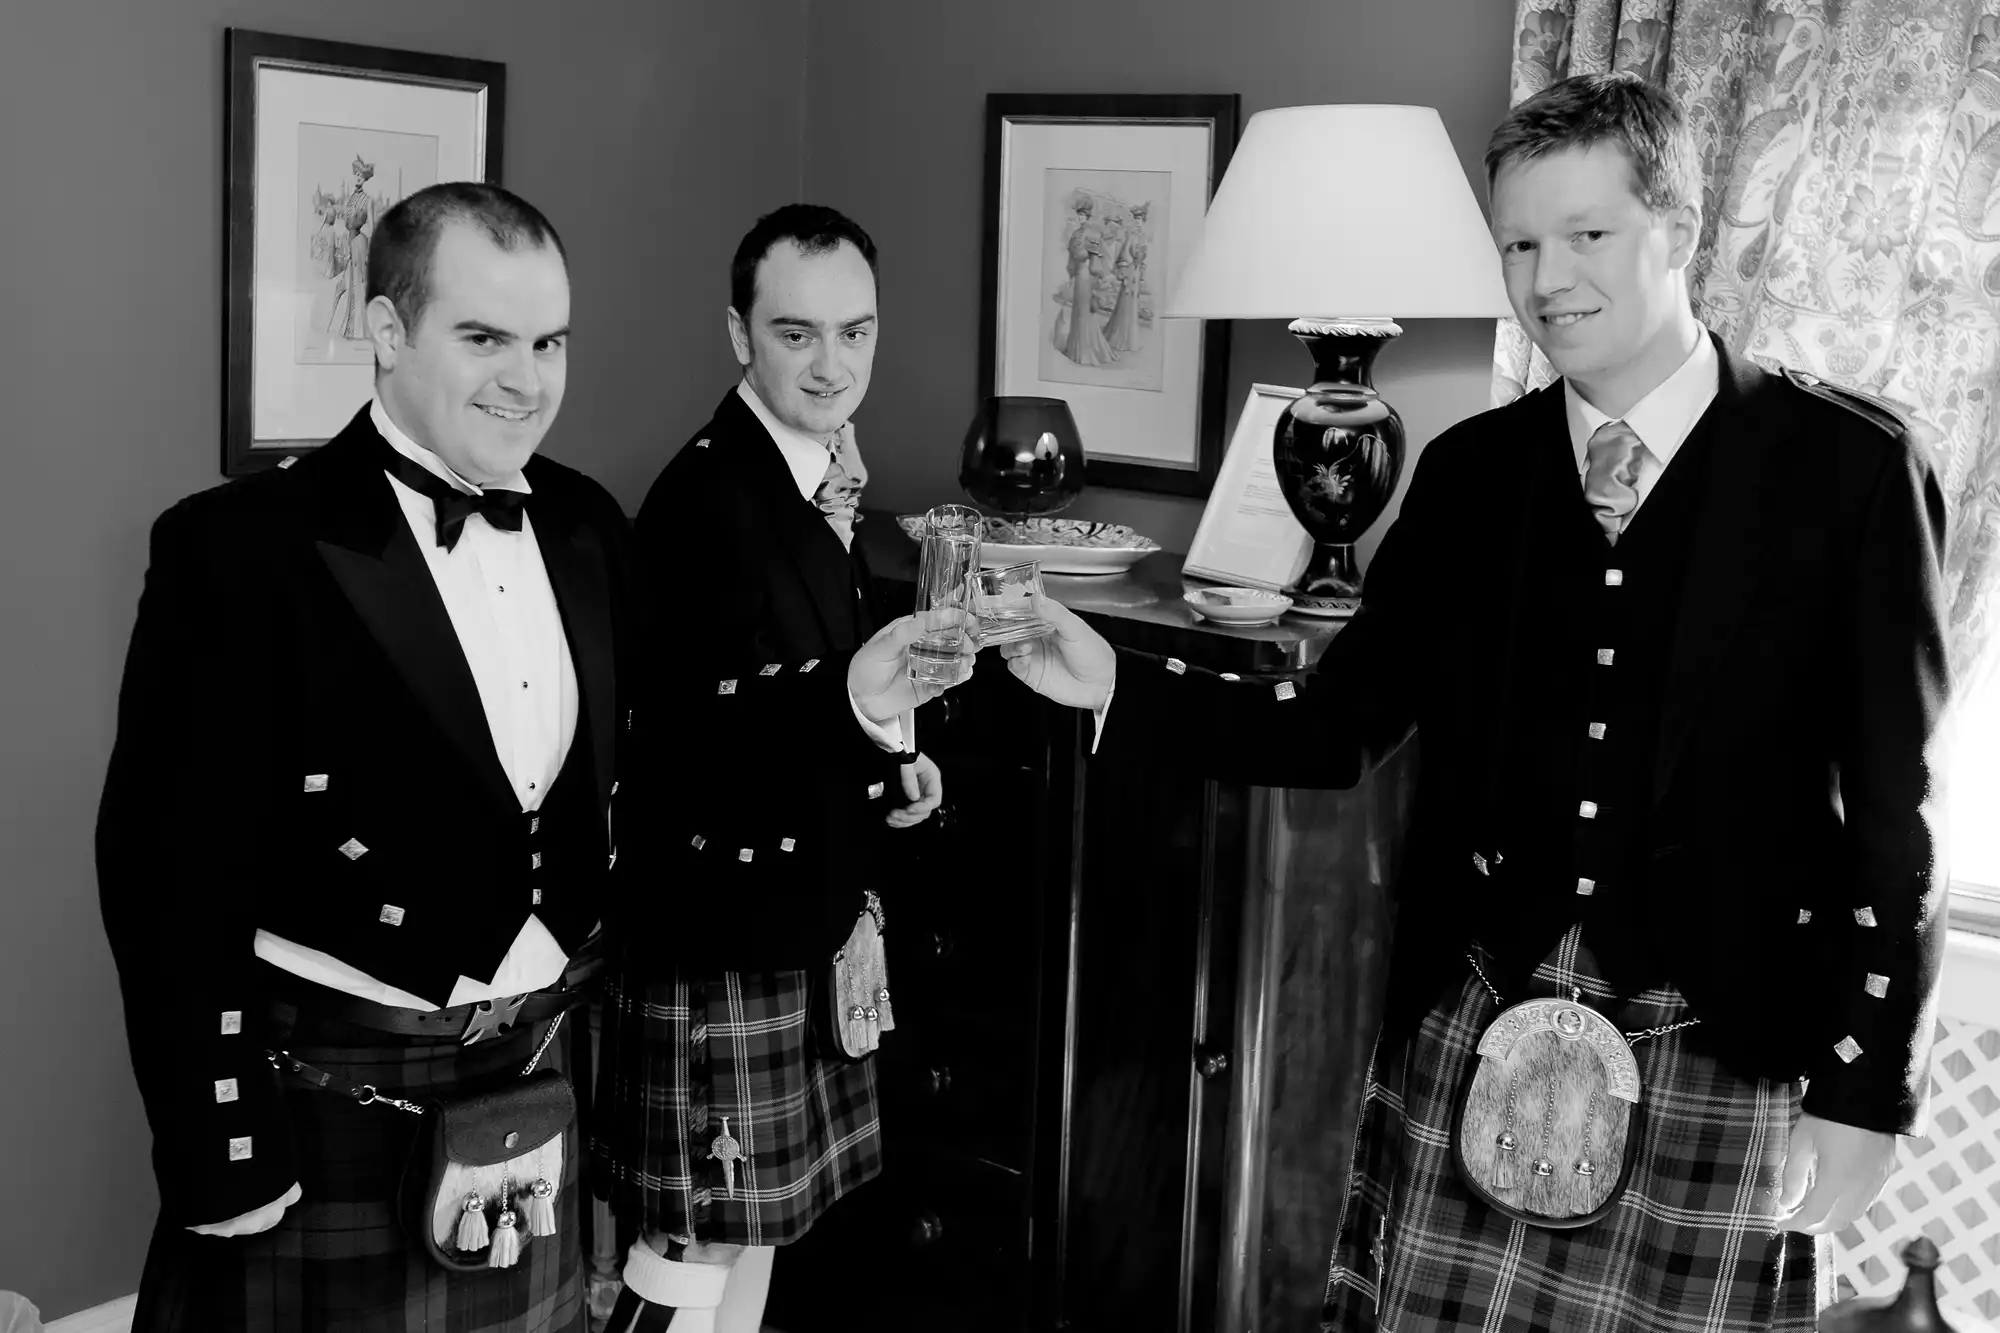 Three men in formal attire with kilts holding drinks, standing in a room with elegant decor.